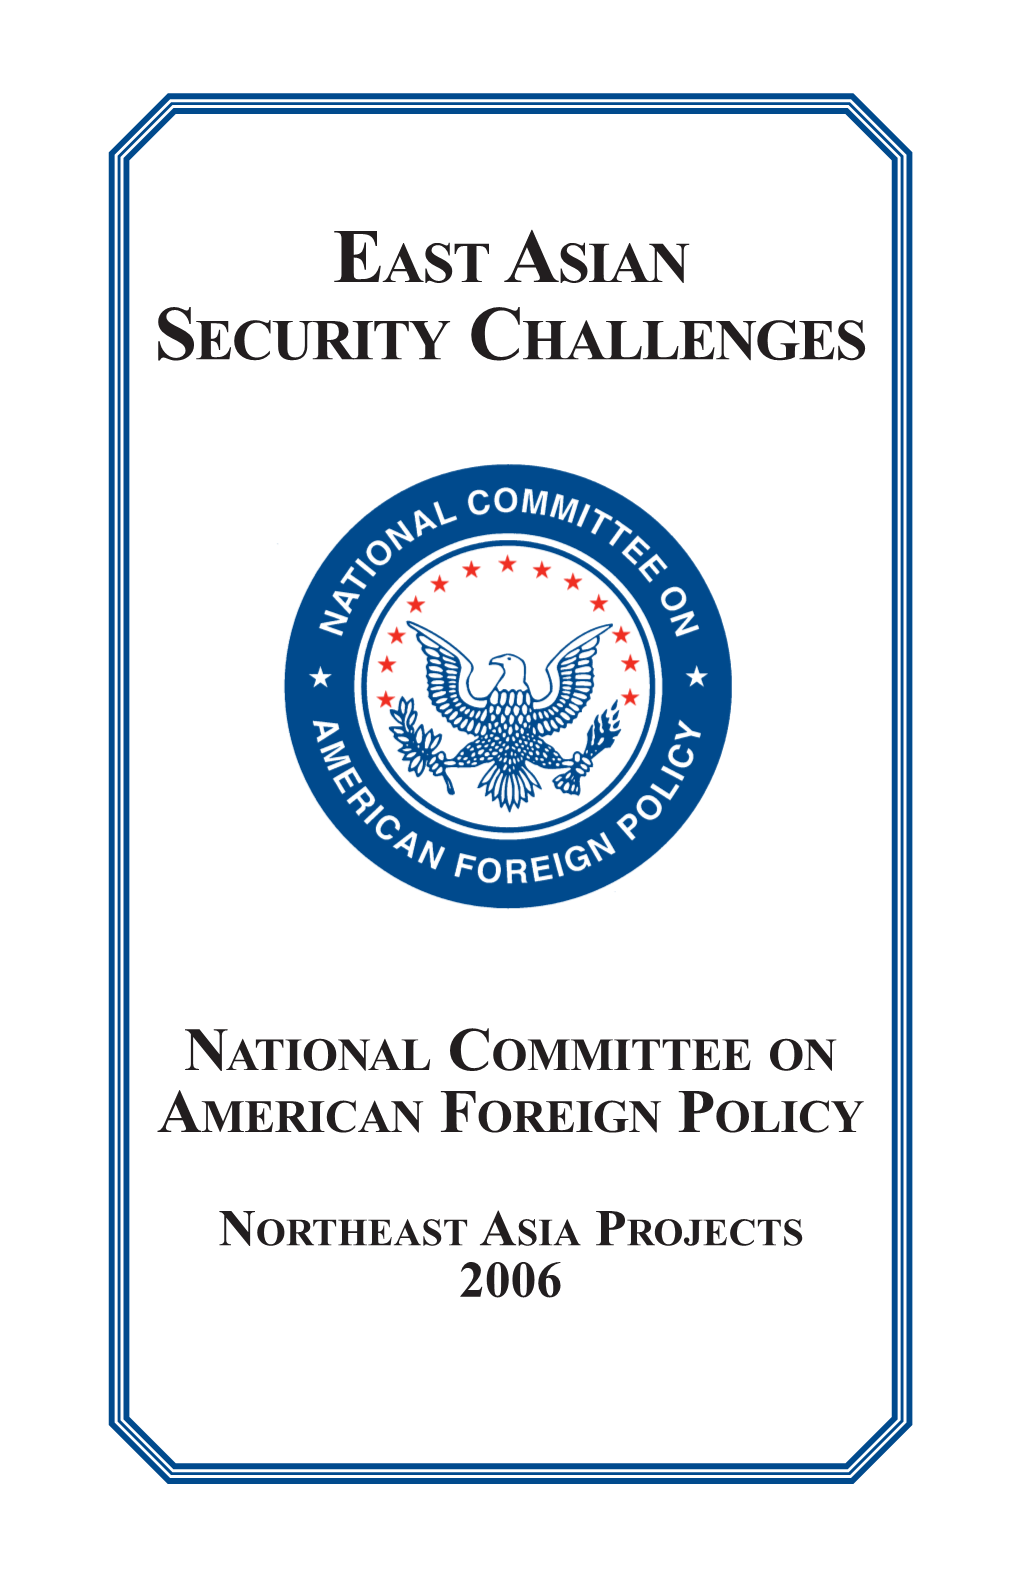 East Asian Security Challenges